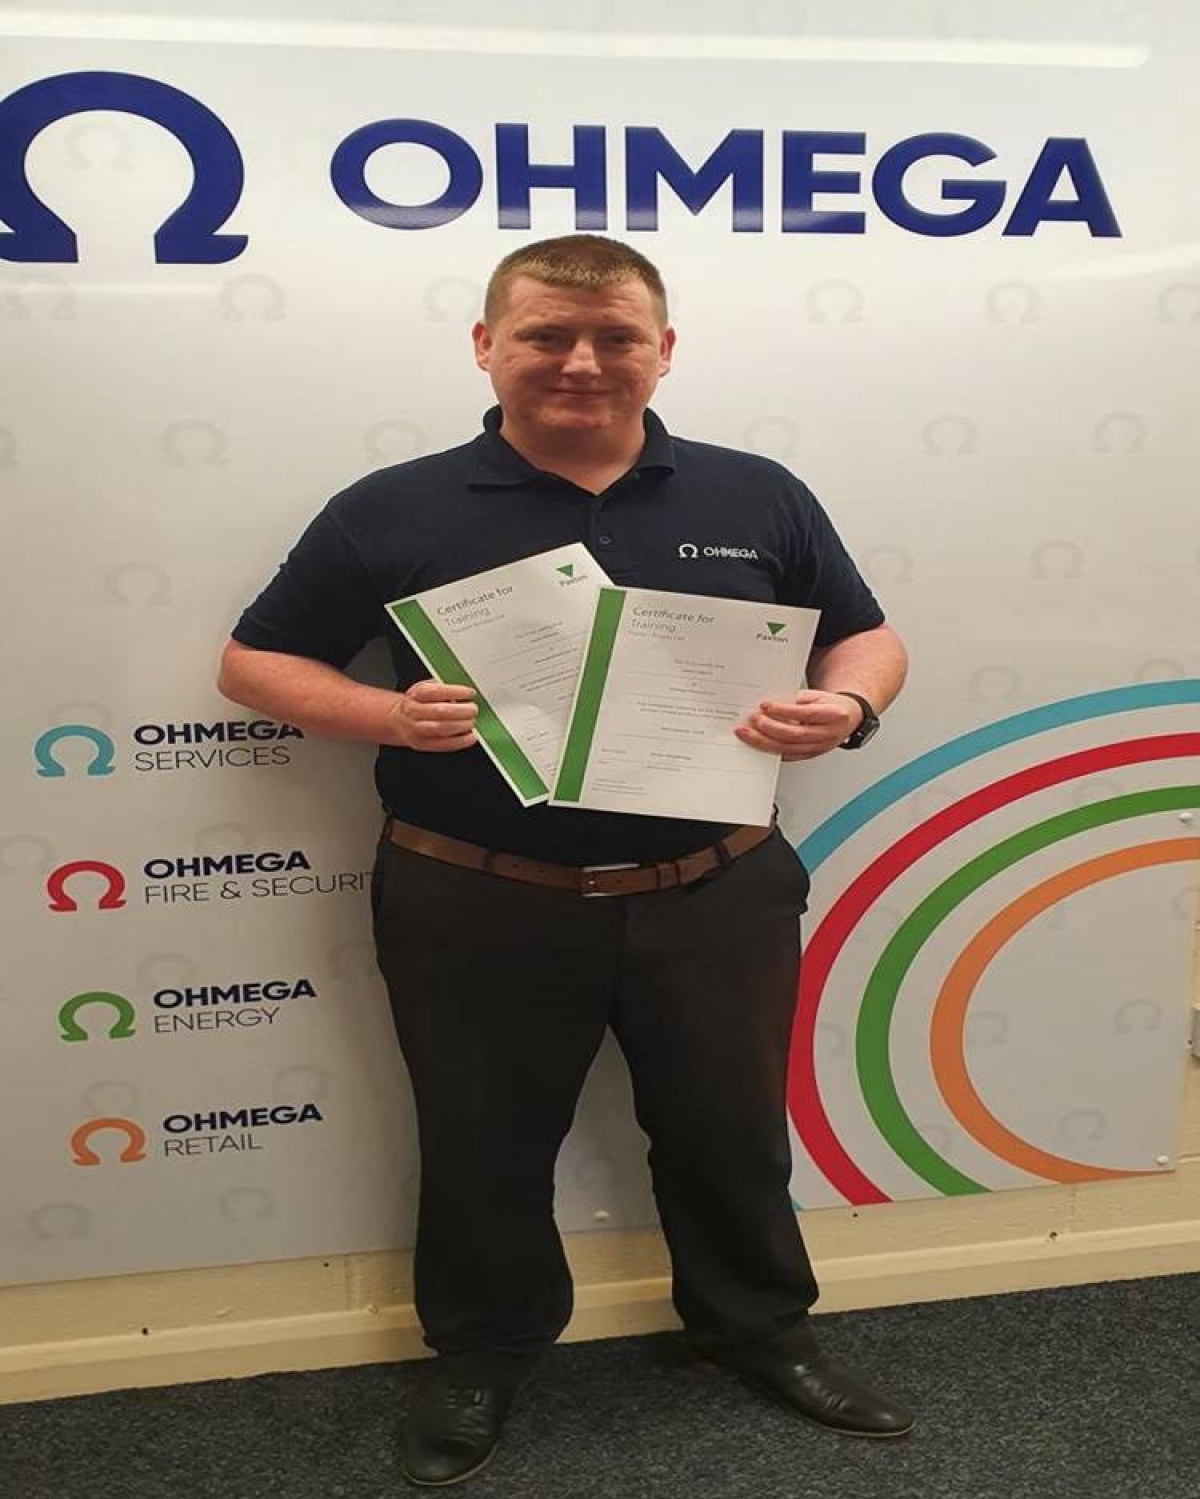 Ohmega&#039;s Fire &amp; Security team for completing trainings